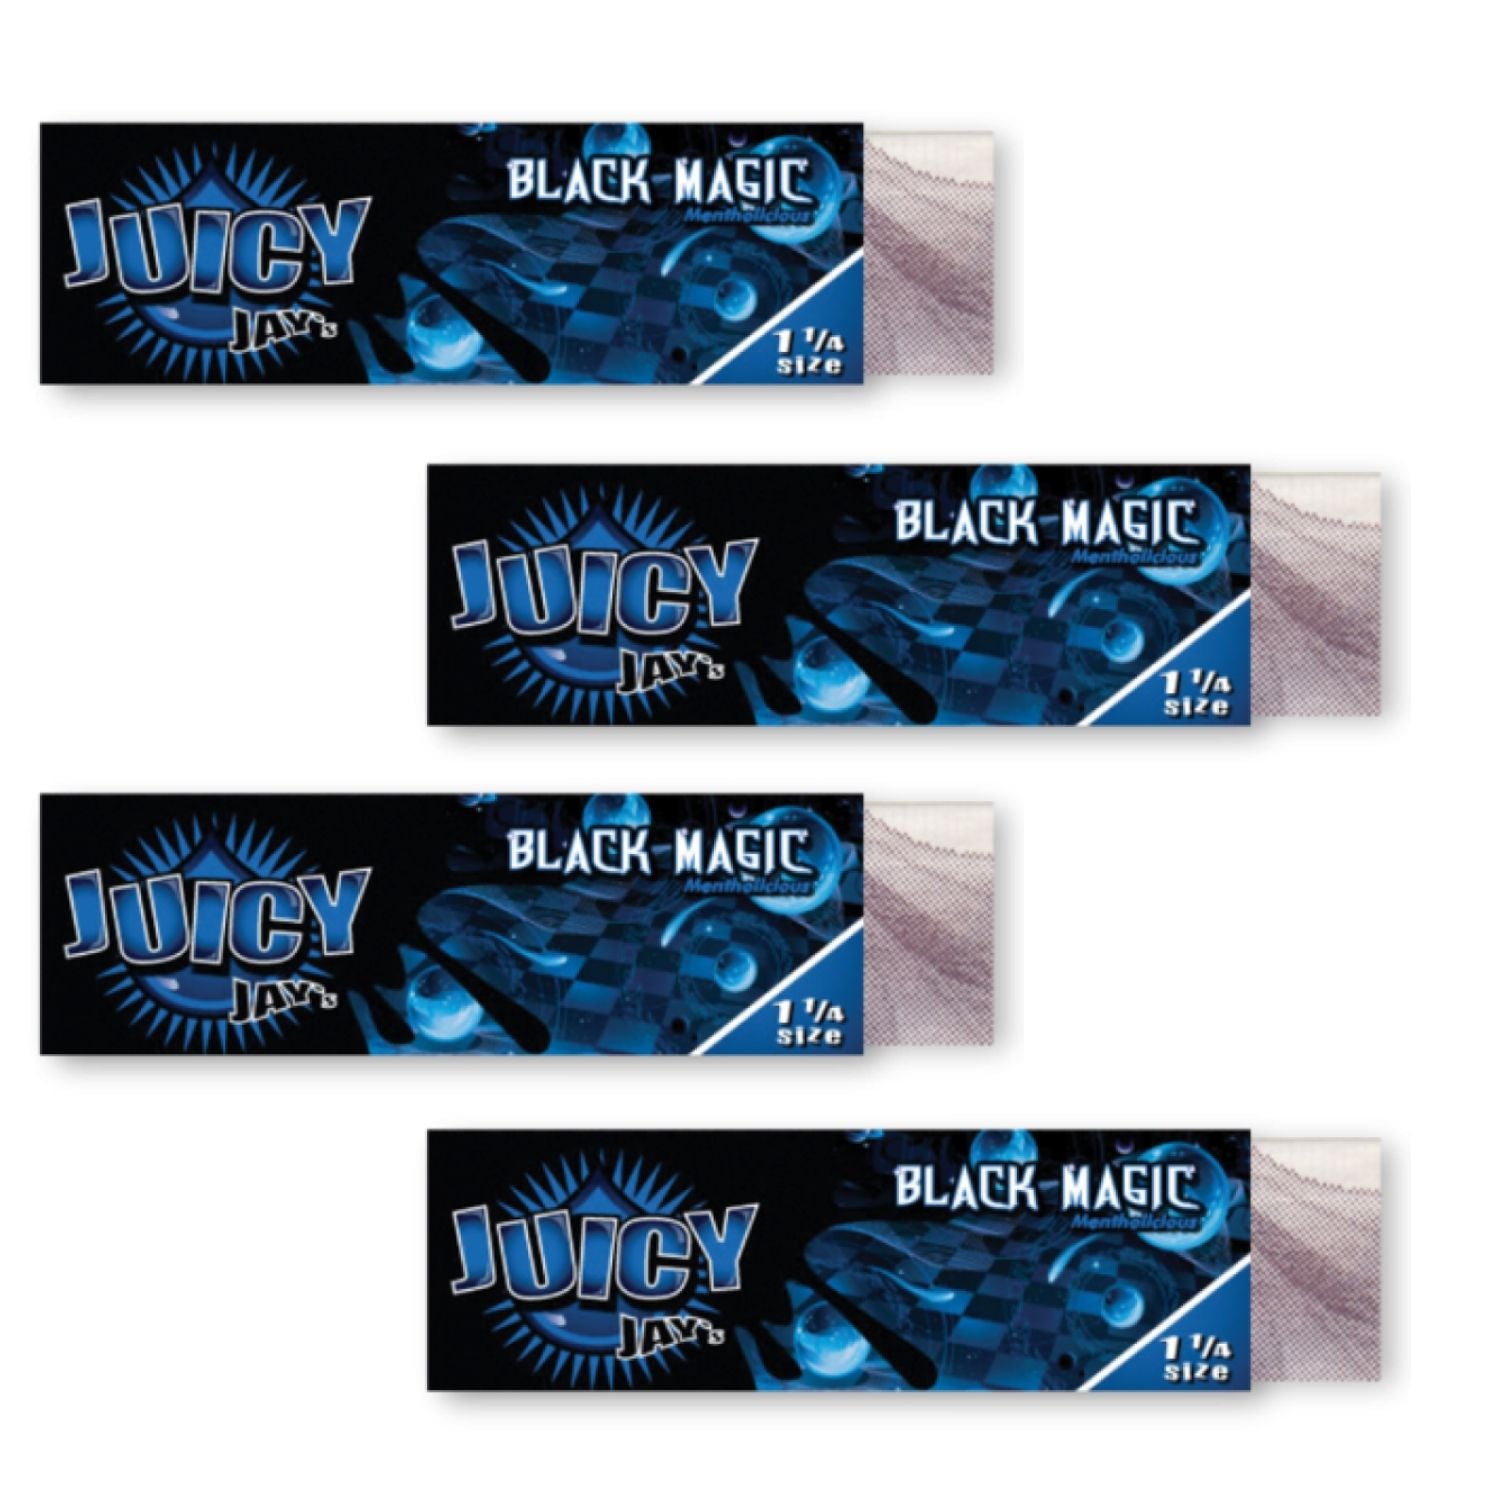 Juicy Jay Rolling Papers - Black Magic Flavor - 1 1/4 Size